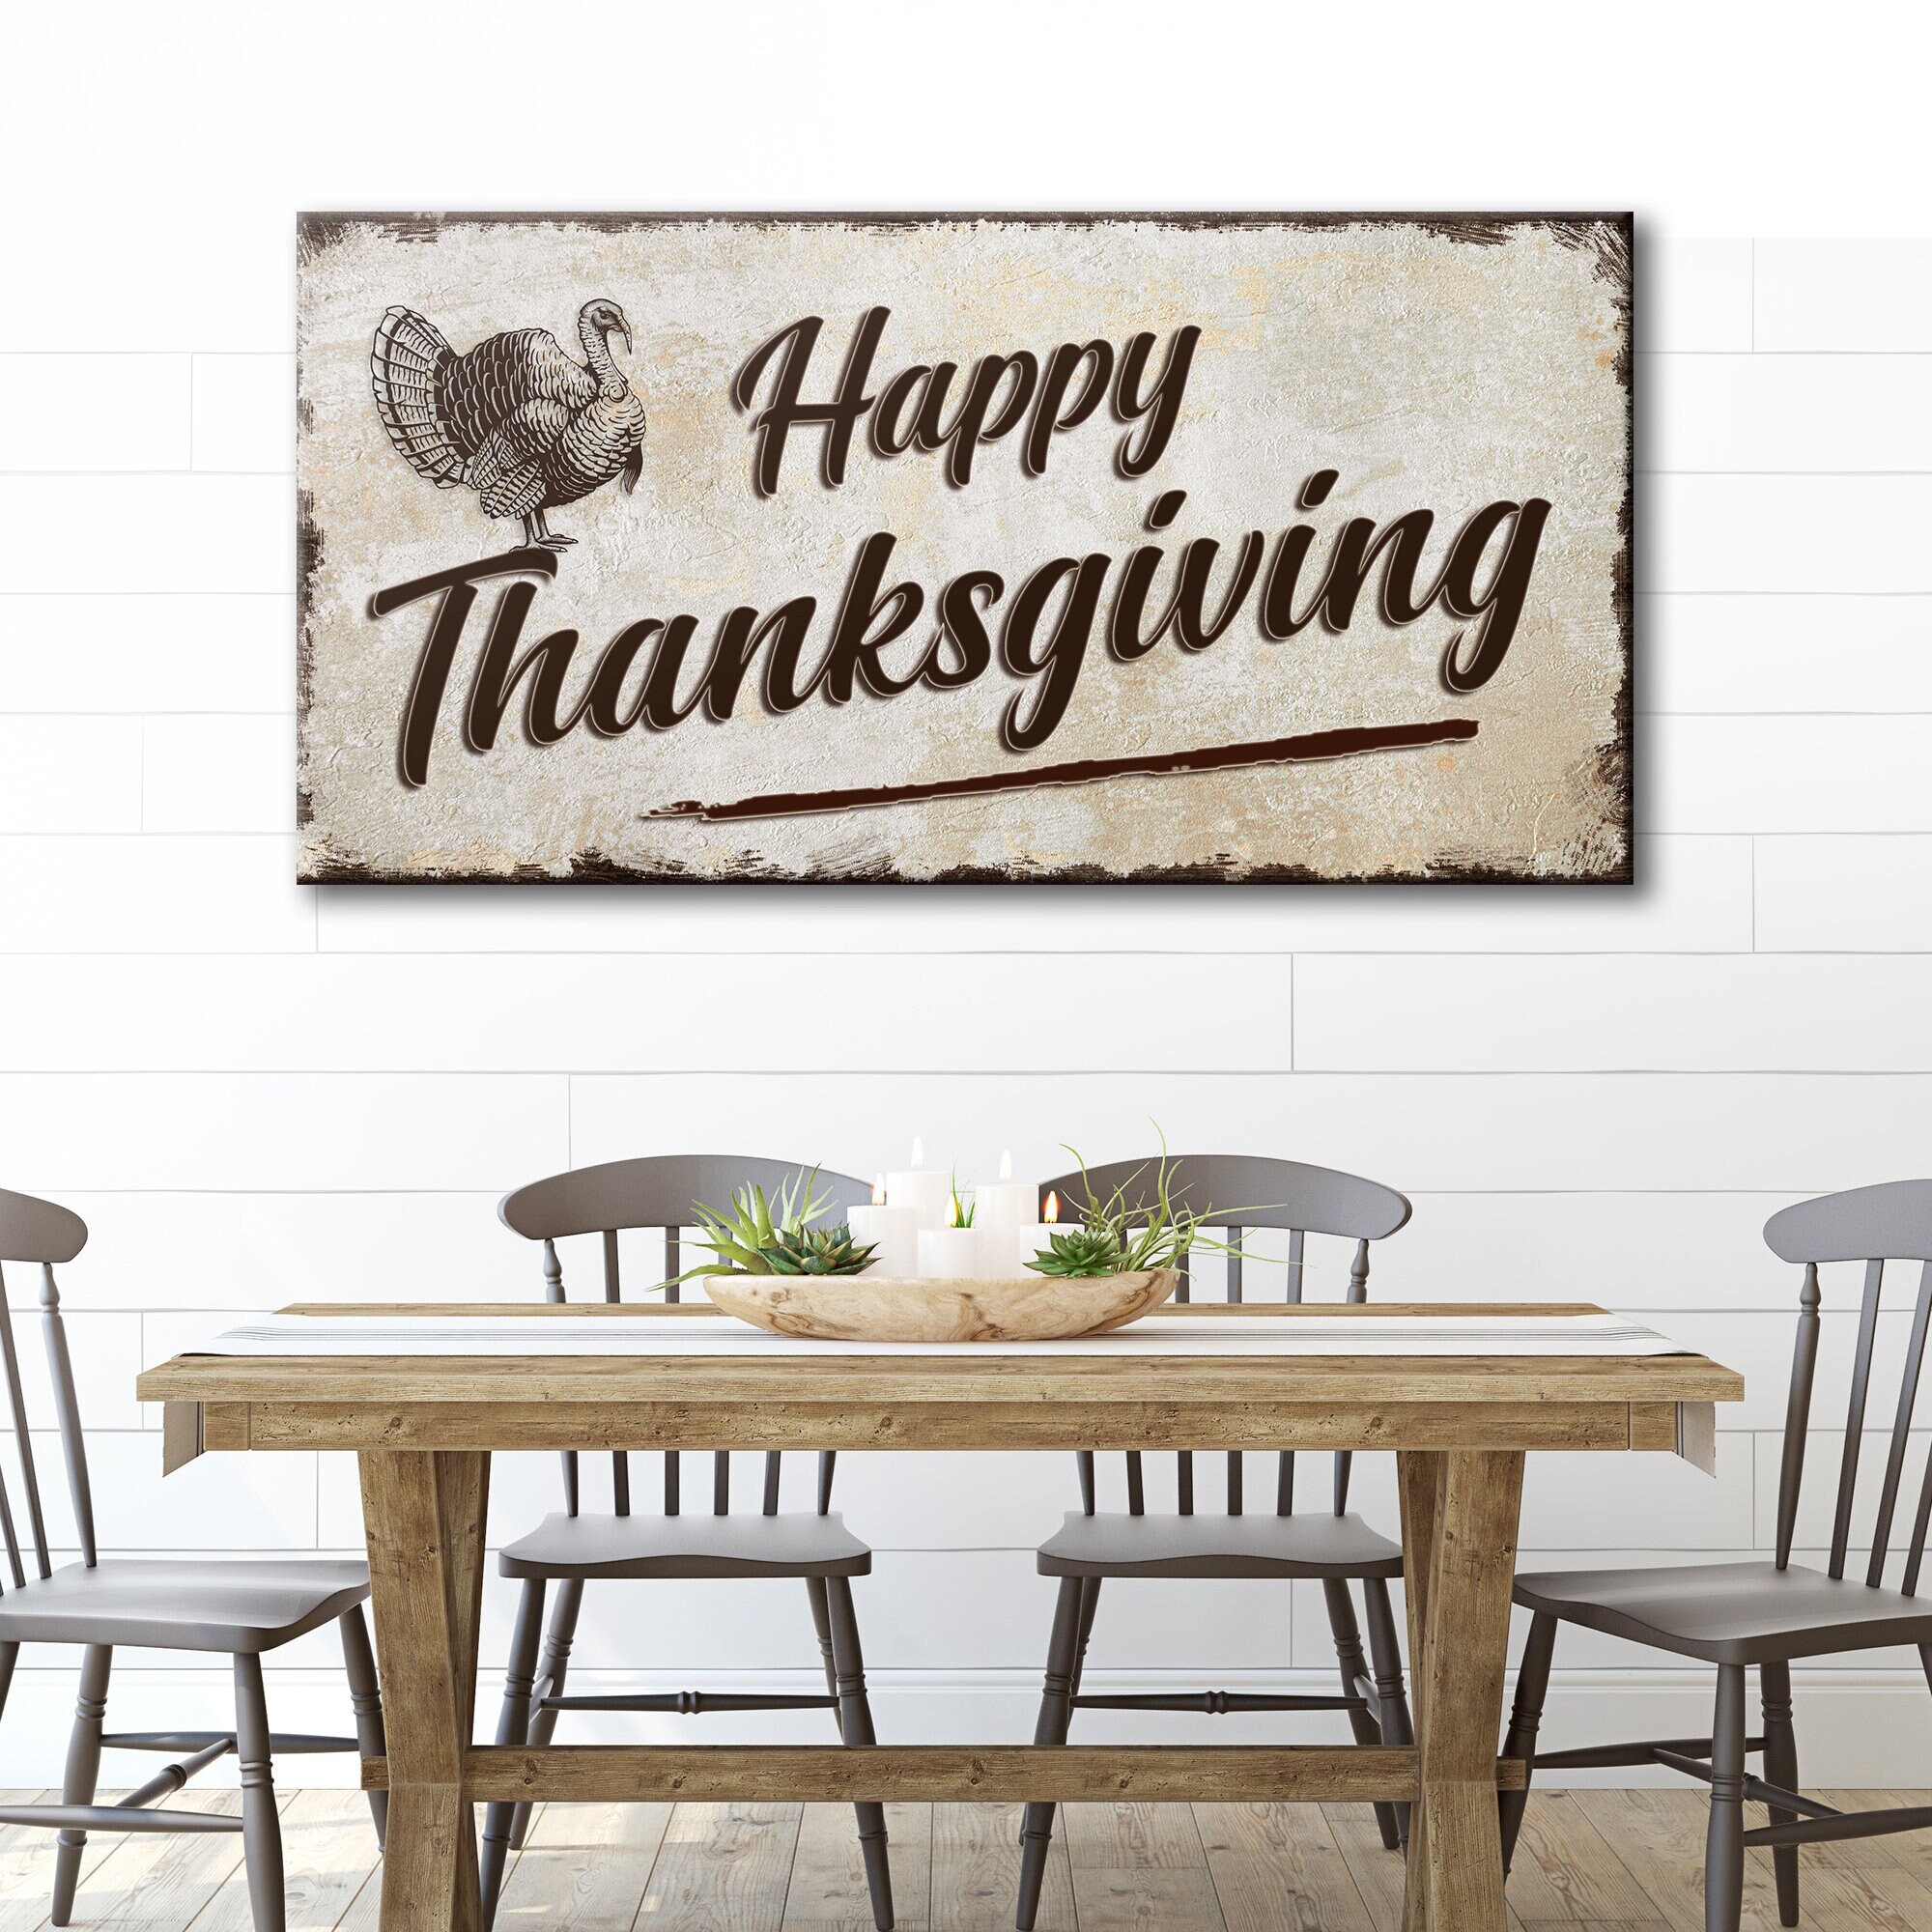 Thanksgiving Wall Decor for Sale in Las Vegas, NV - OfferUp